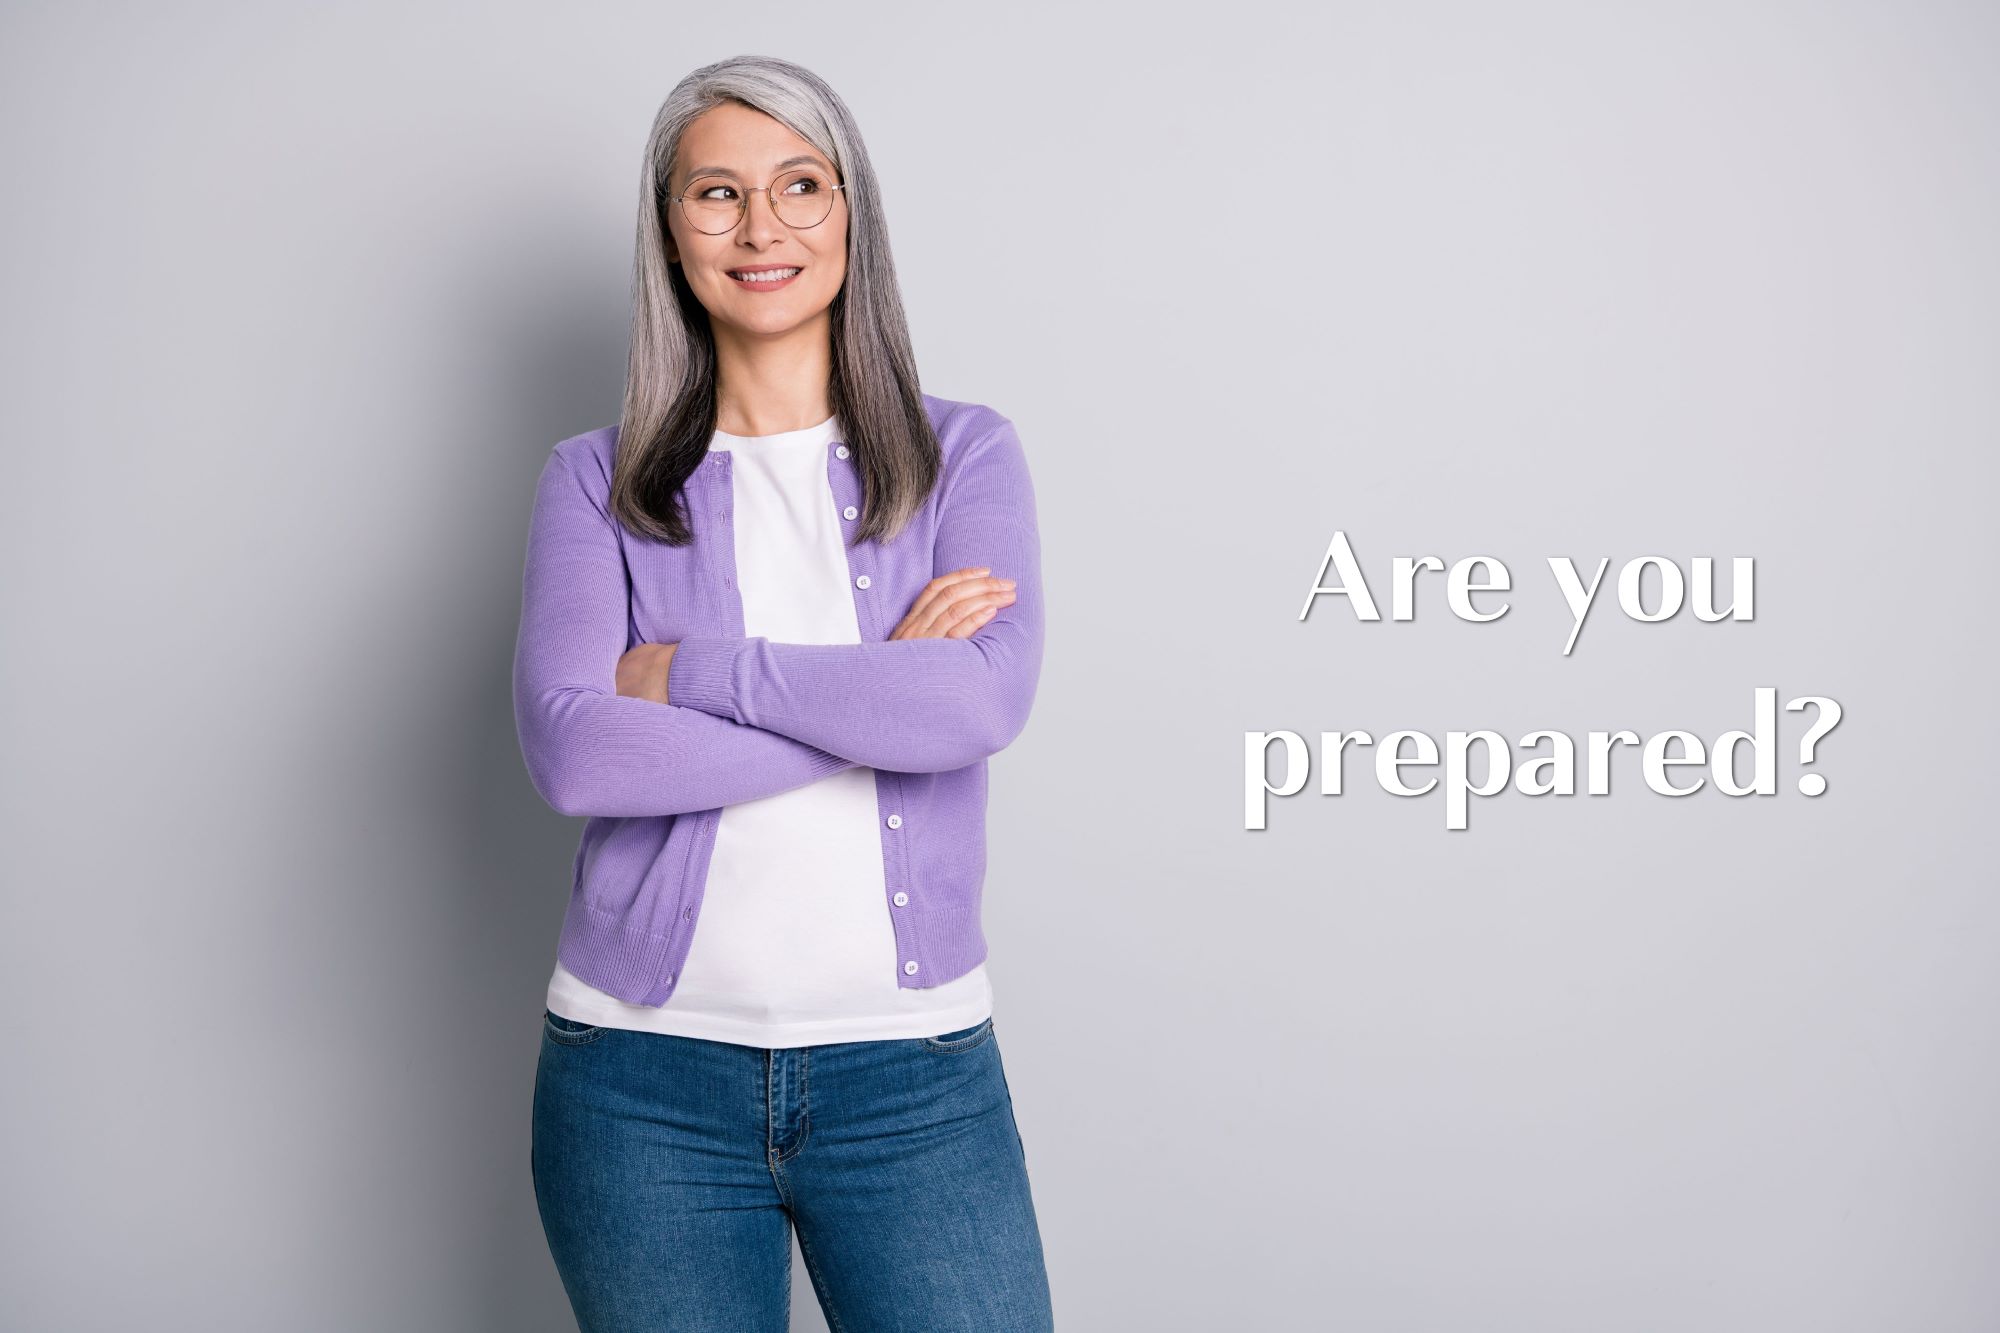 Long-Term Planning: Are You Prepared For an Unexpected Accident or Illness?